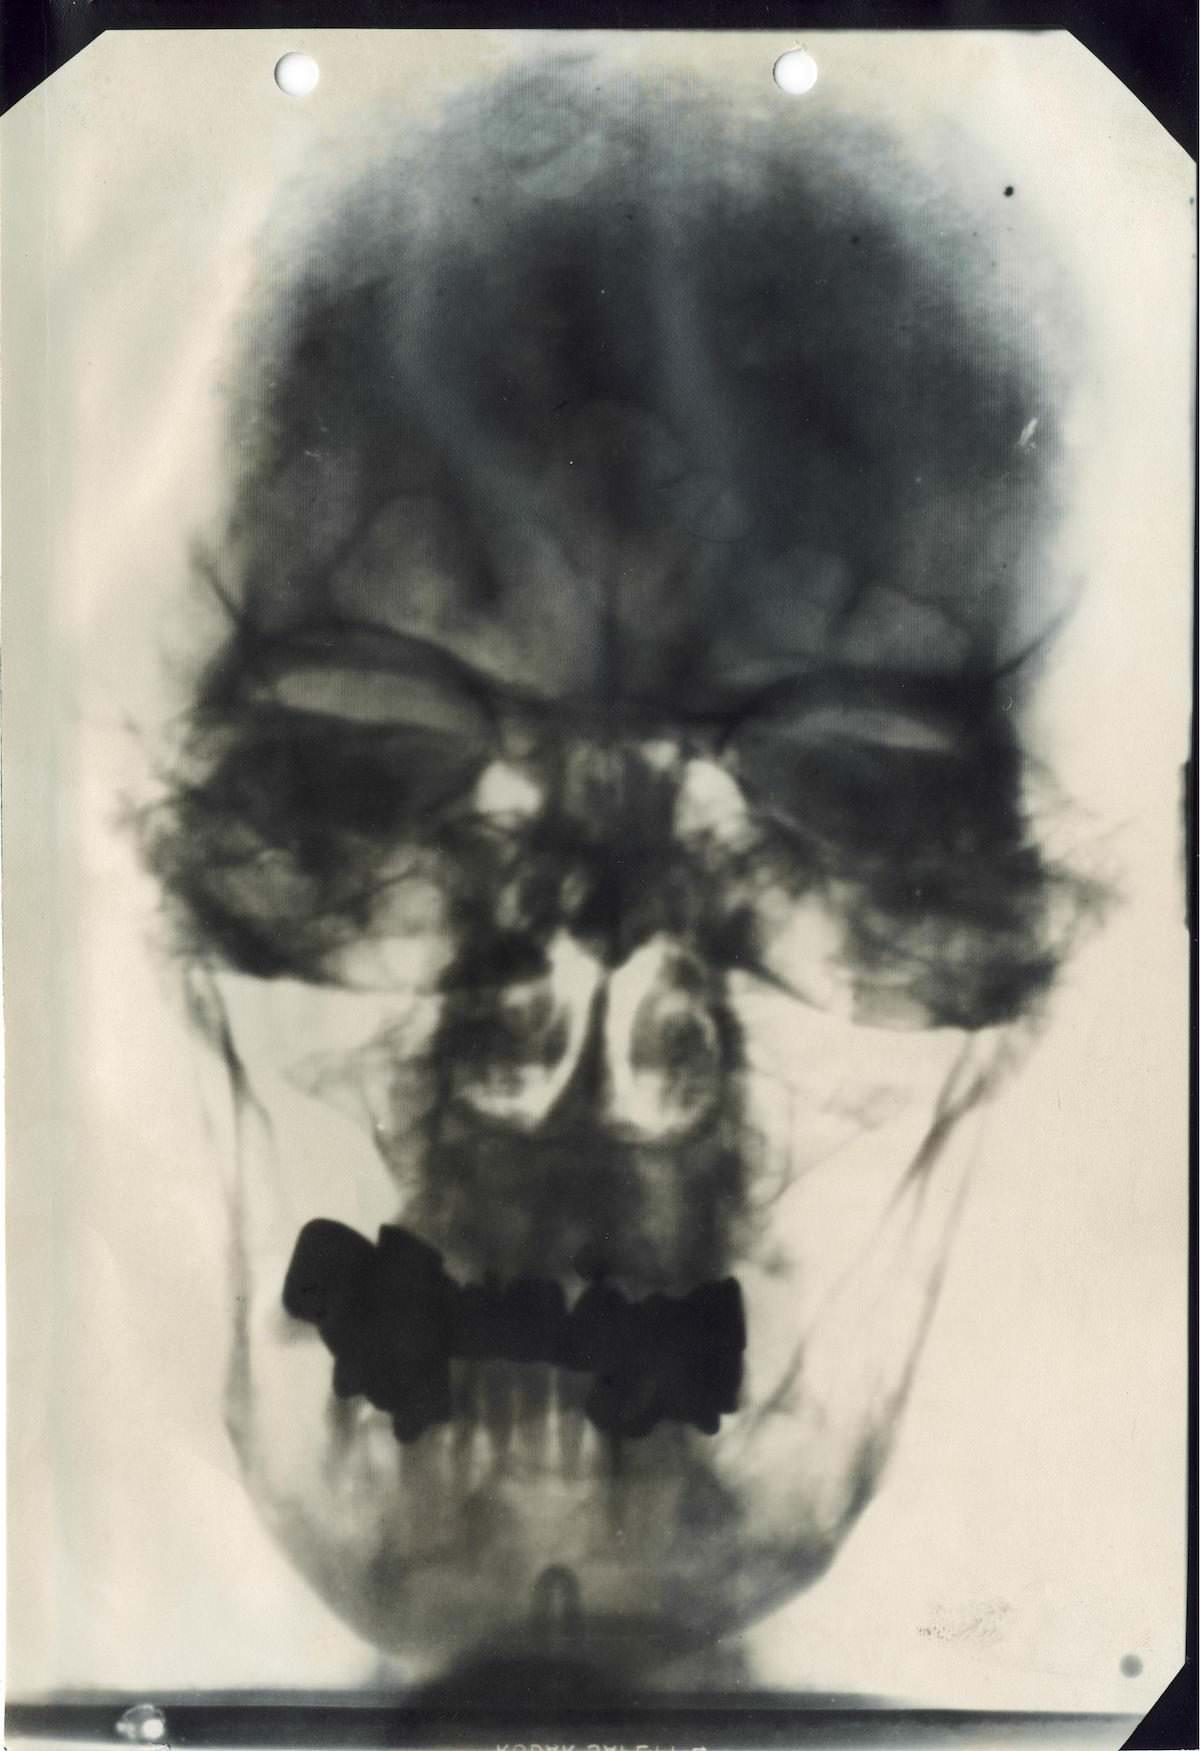 X-ray of Hitler’s nasal passages and teeth. Hitler as Seen by His Doctors